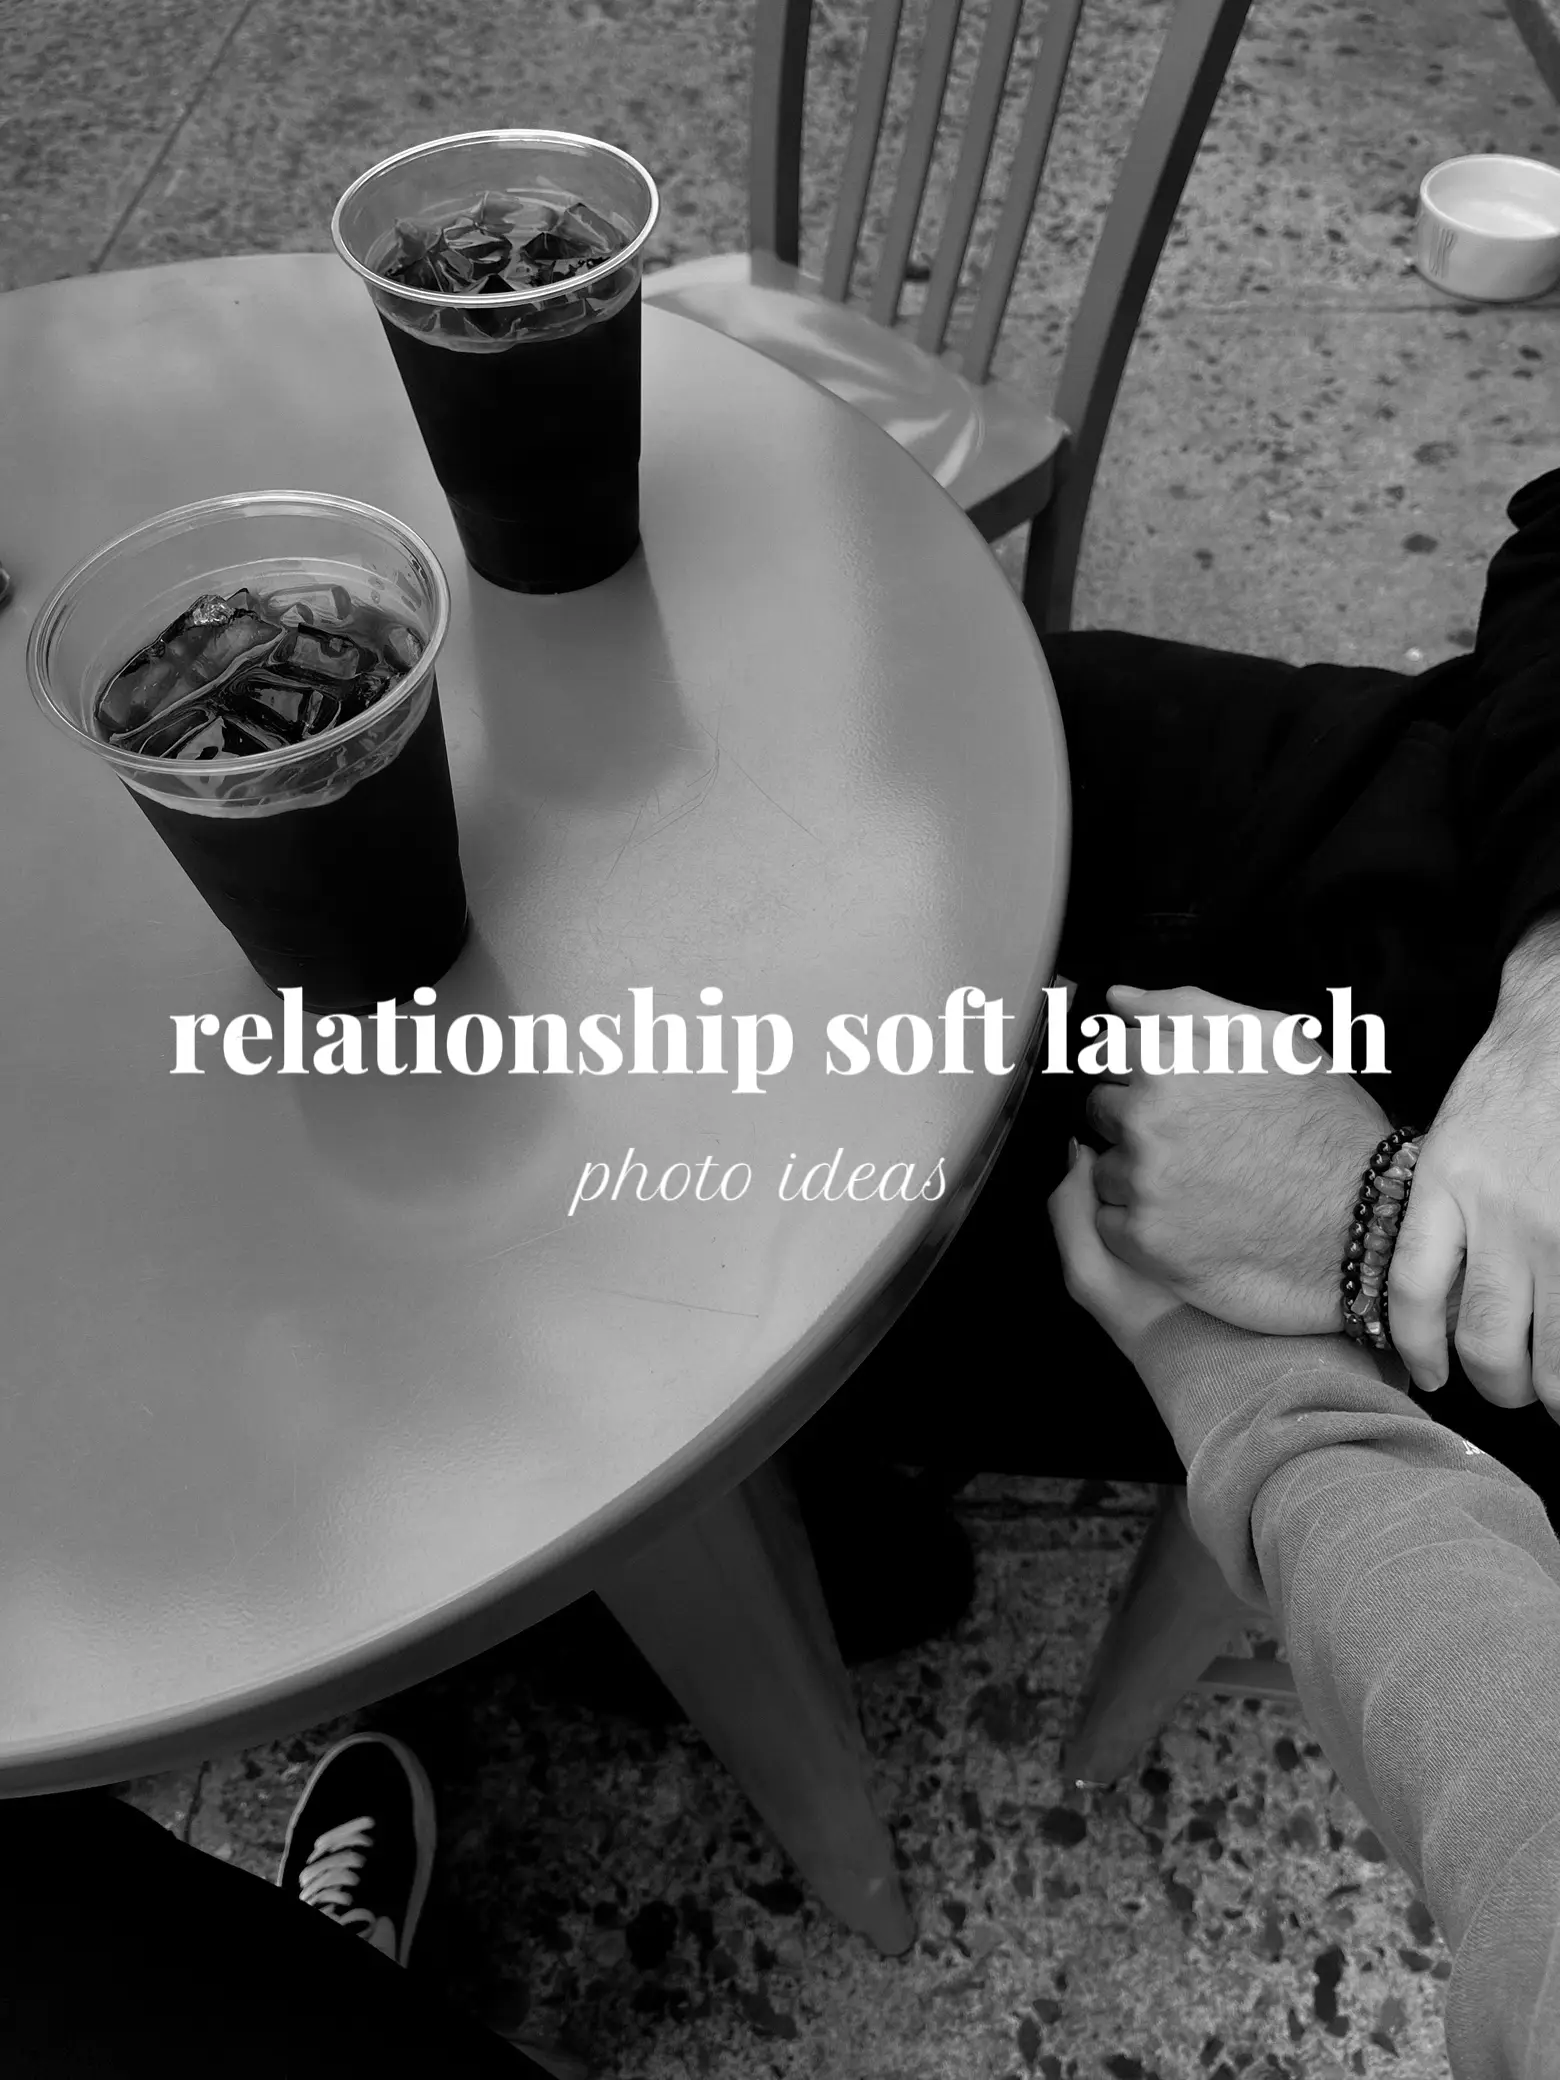 How to Soft-Launch Your Relationship on Instagram